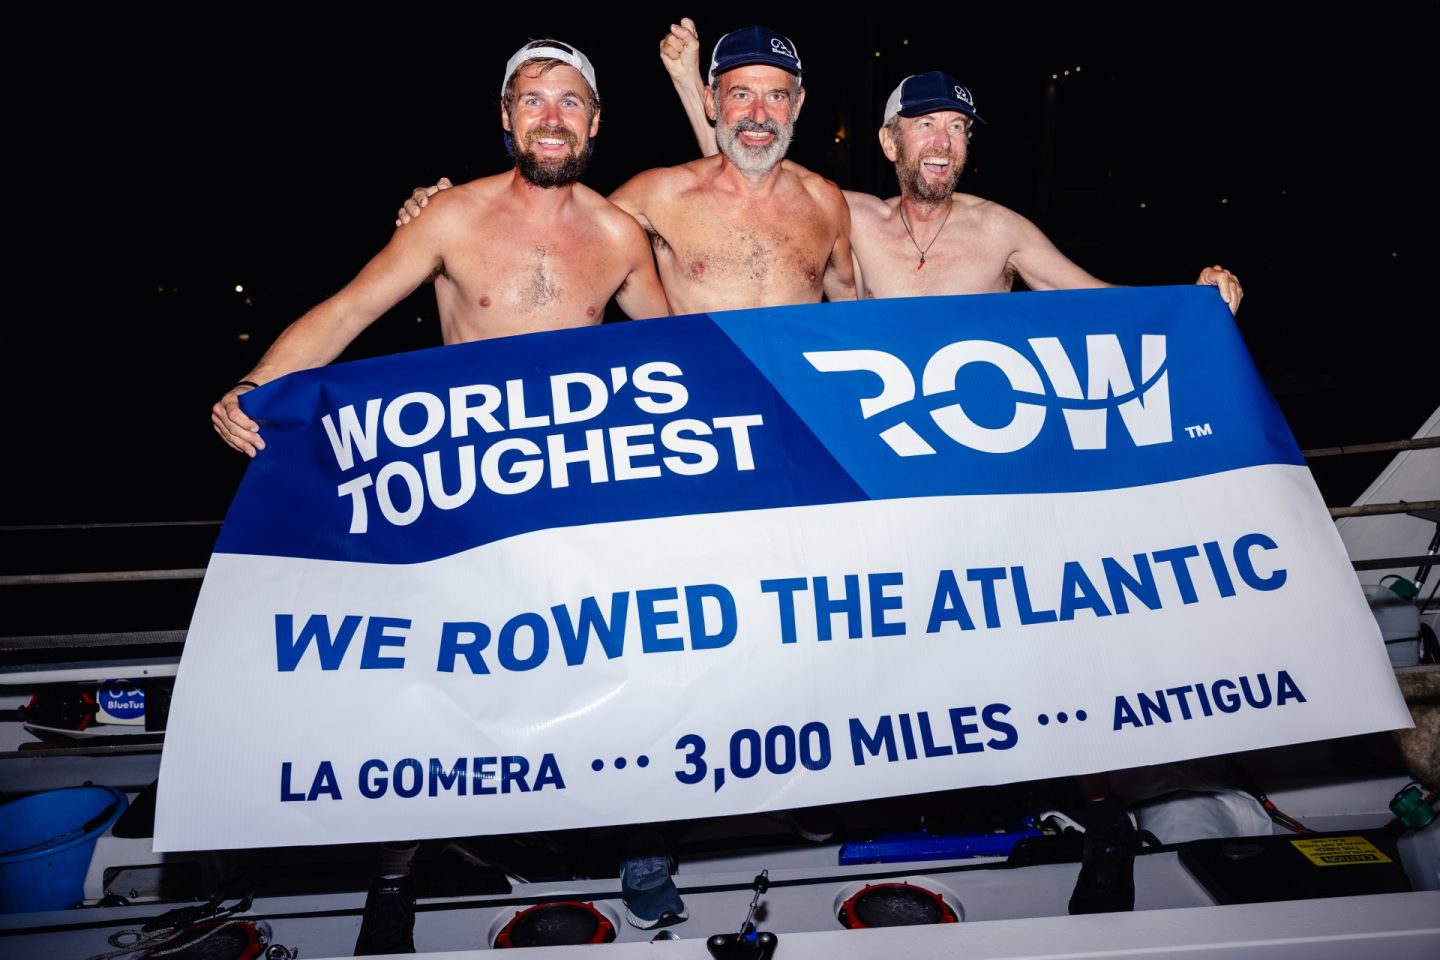 The trio, Chris Wood, Aaron Kneebone and David Tiplady completed the 3,000-mile rowing race in 38 days, 18 hours and 29 minutes, the first trio to arrive and finishing sixth overall. Credit: World’s Toughest Row